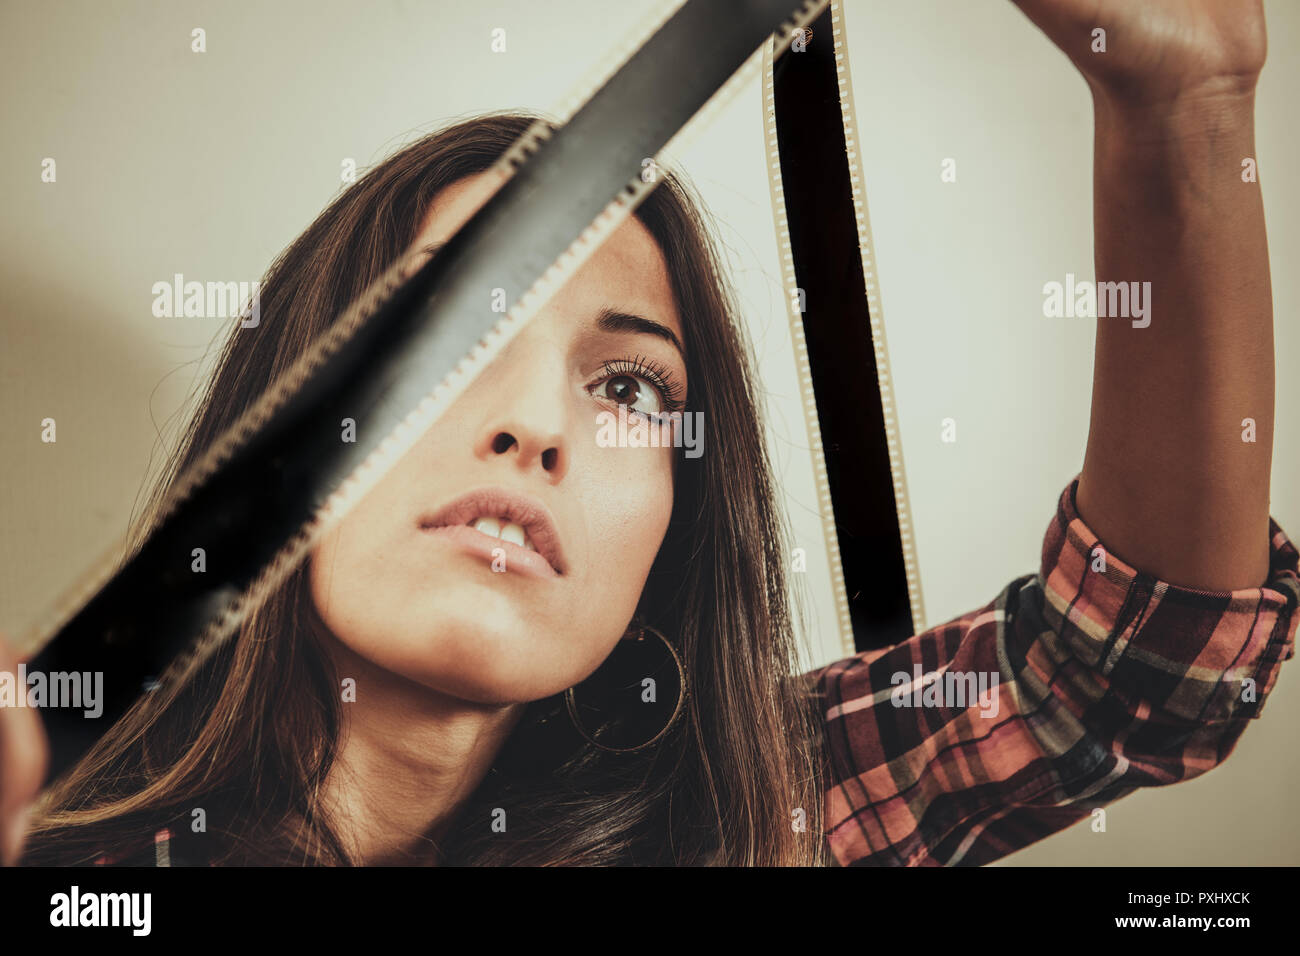 Portrait of young beautiful woman looking at movie filmstrip against the light vintage style Stock Photo